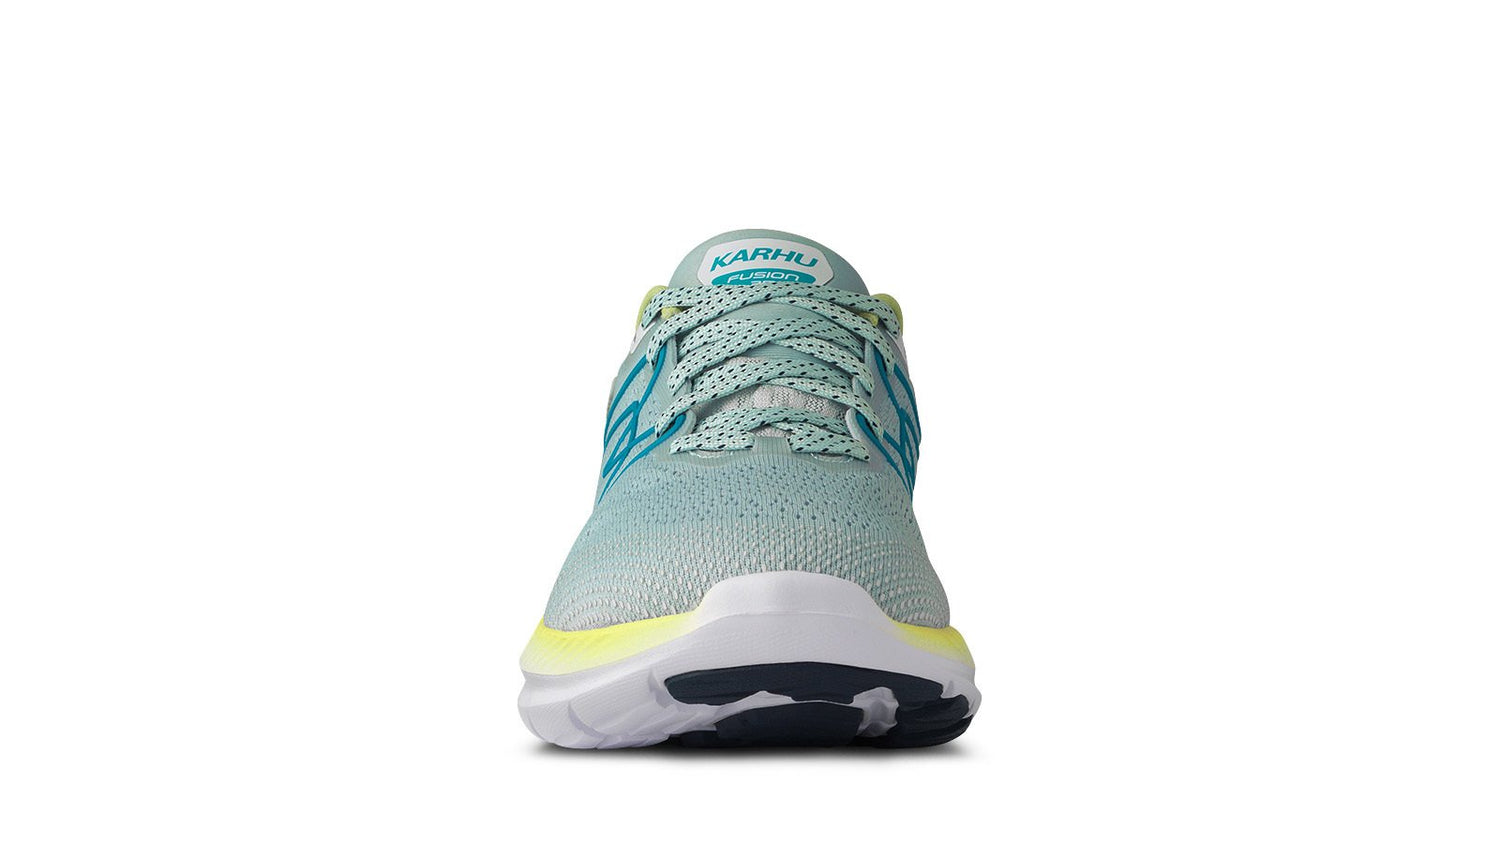 WOMEN'S FUSION 3.5 'ICY WATERS' - GREY / ALGIERS BLUE